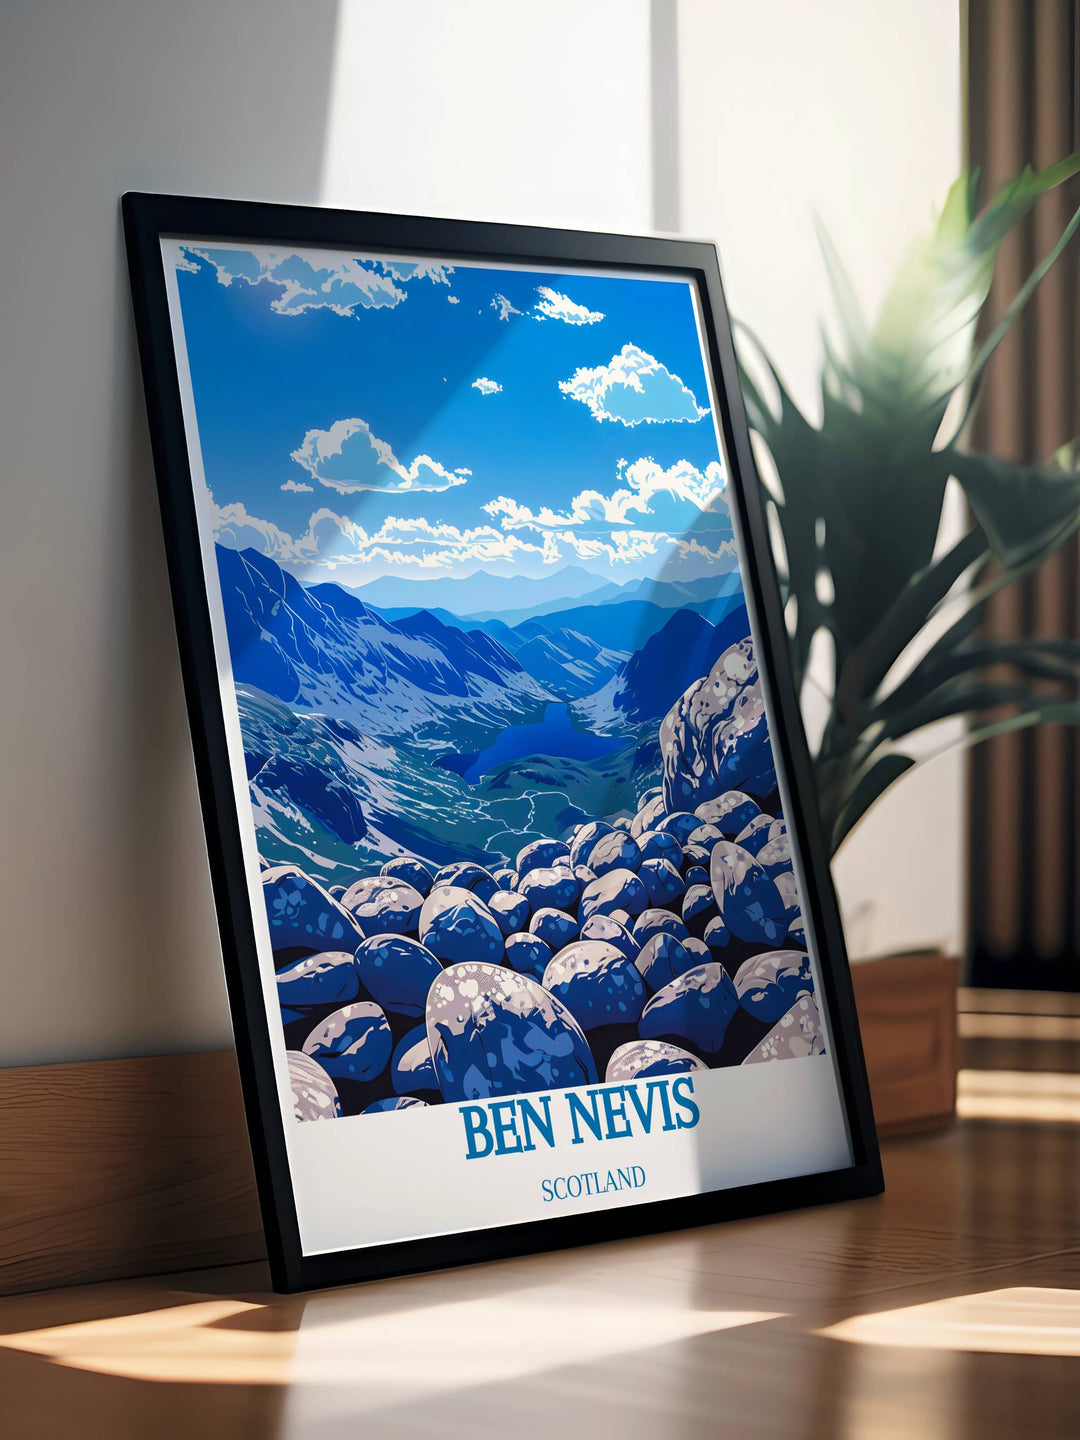 Hikers reaching the summit of Ben Nevis captured in wall art, representing the achievement and adventure of mountain climbing